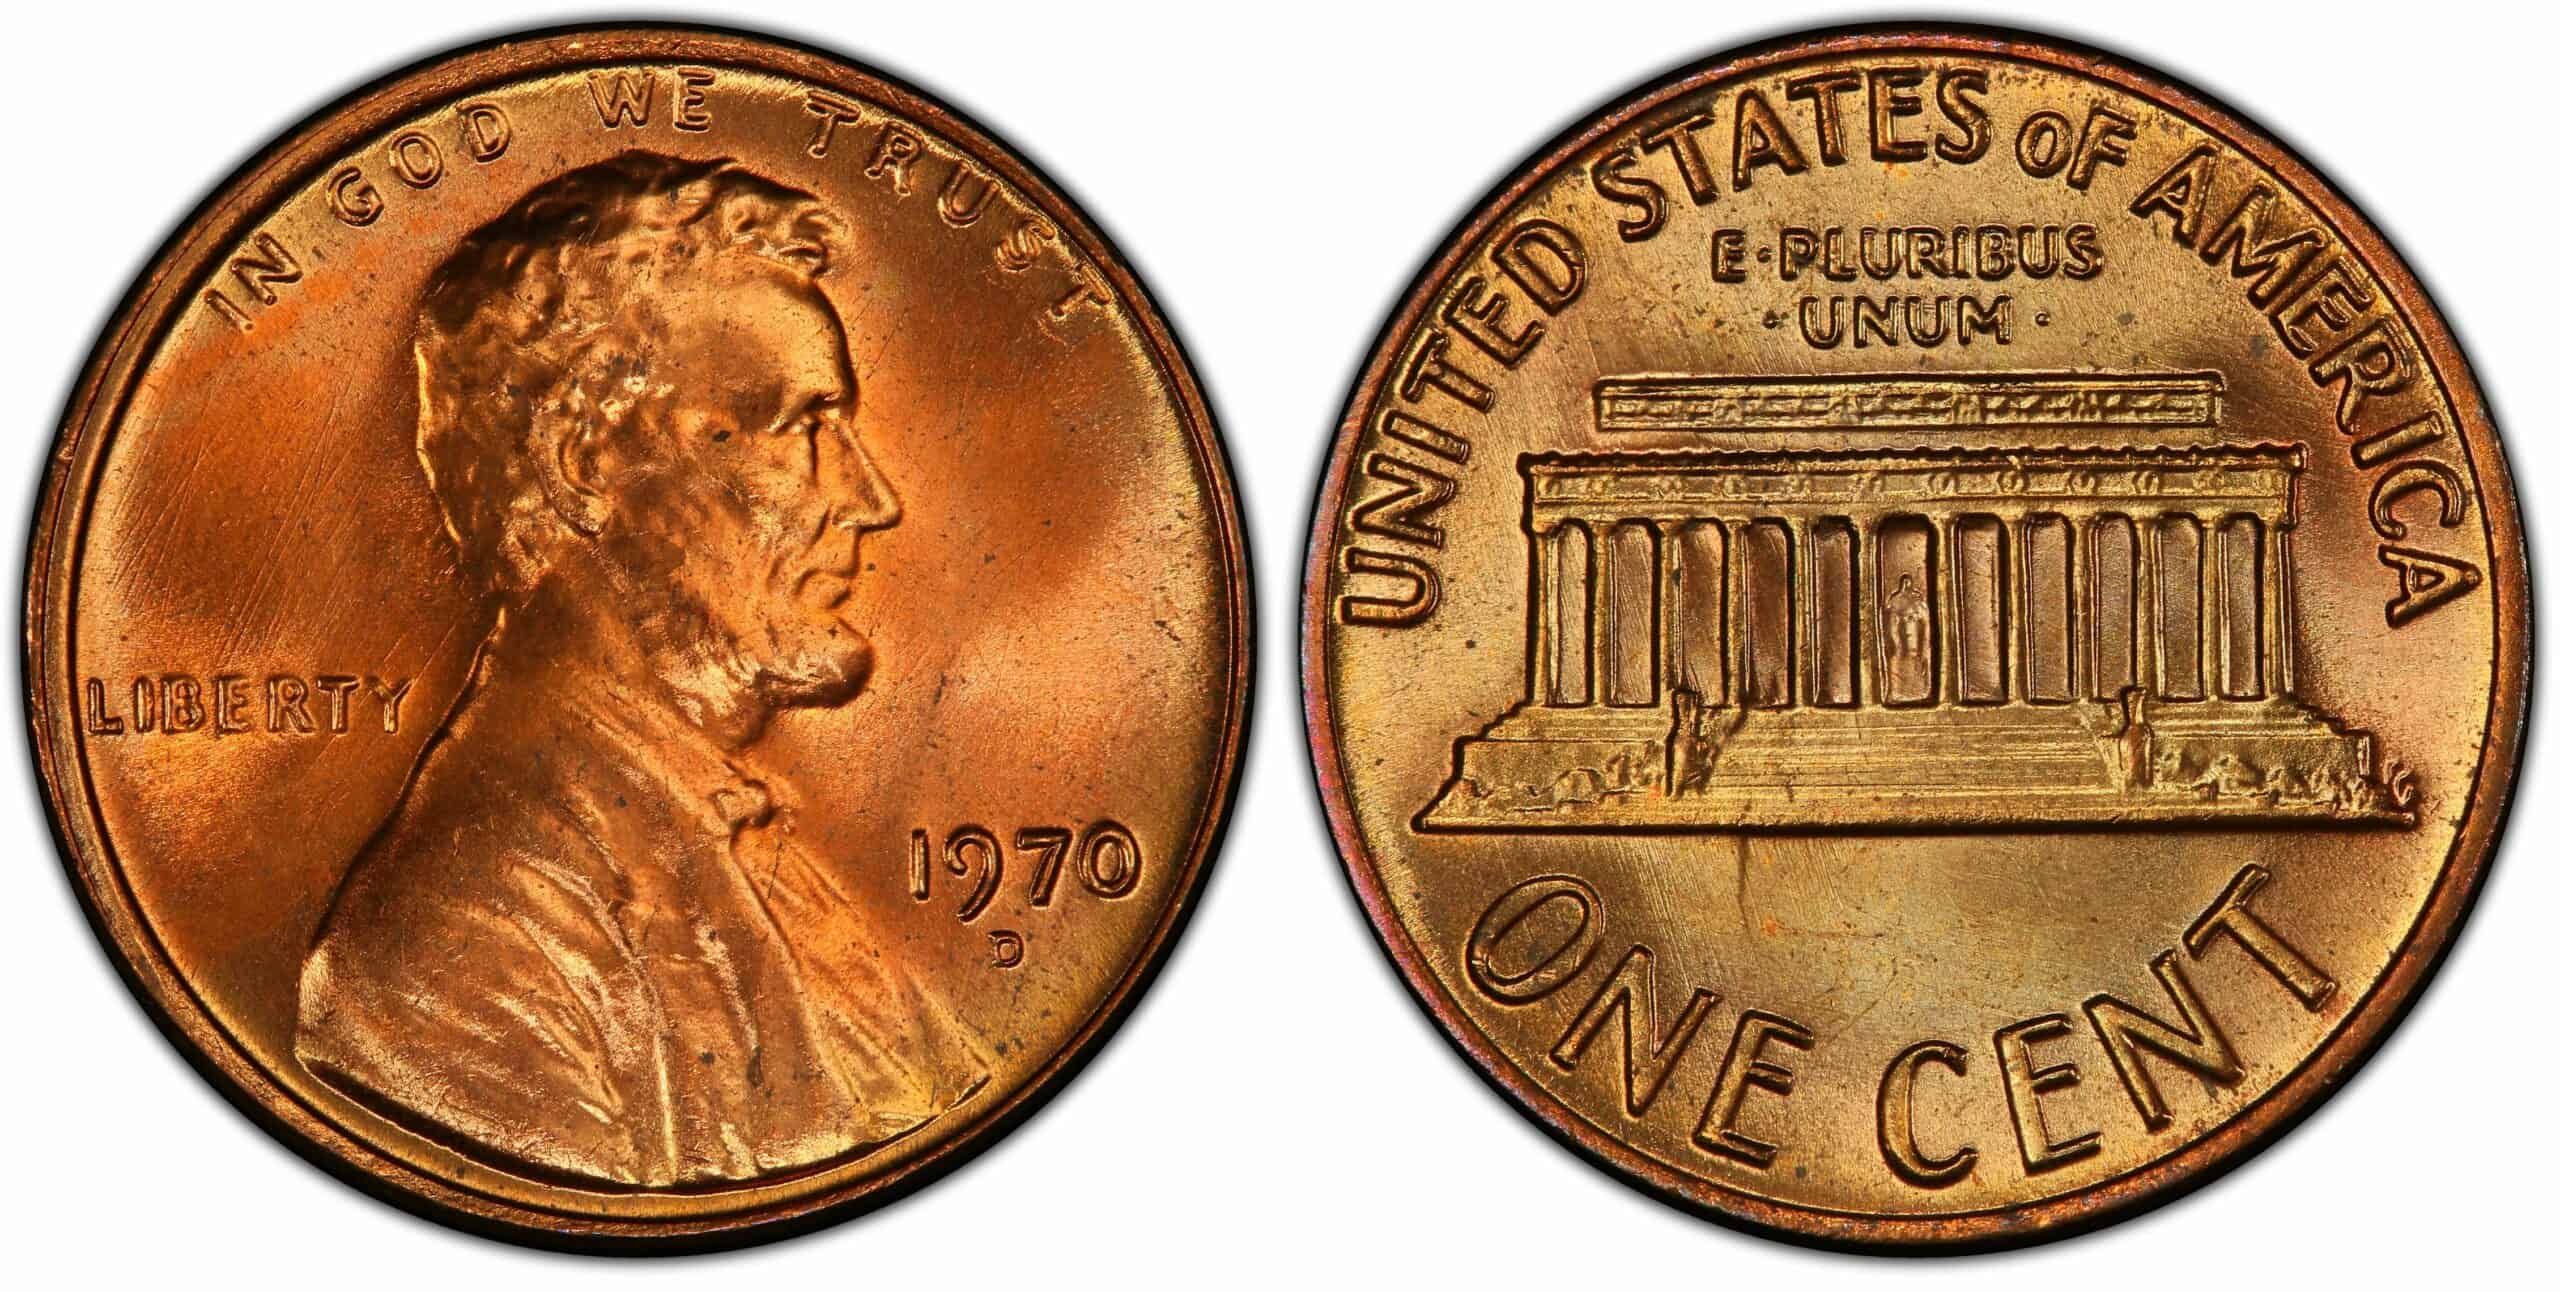 1970 D Penny Value (RD)